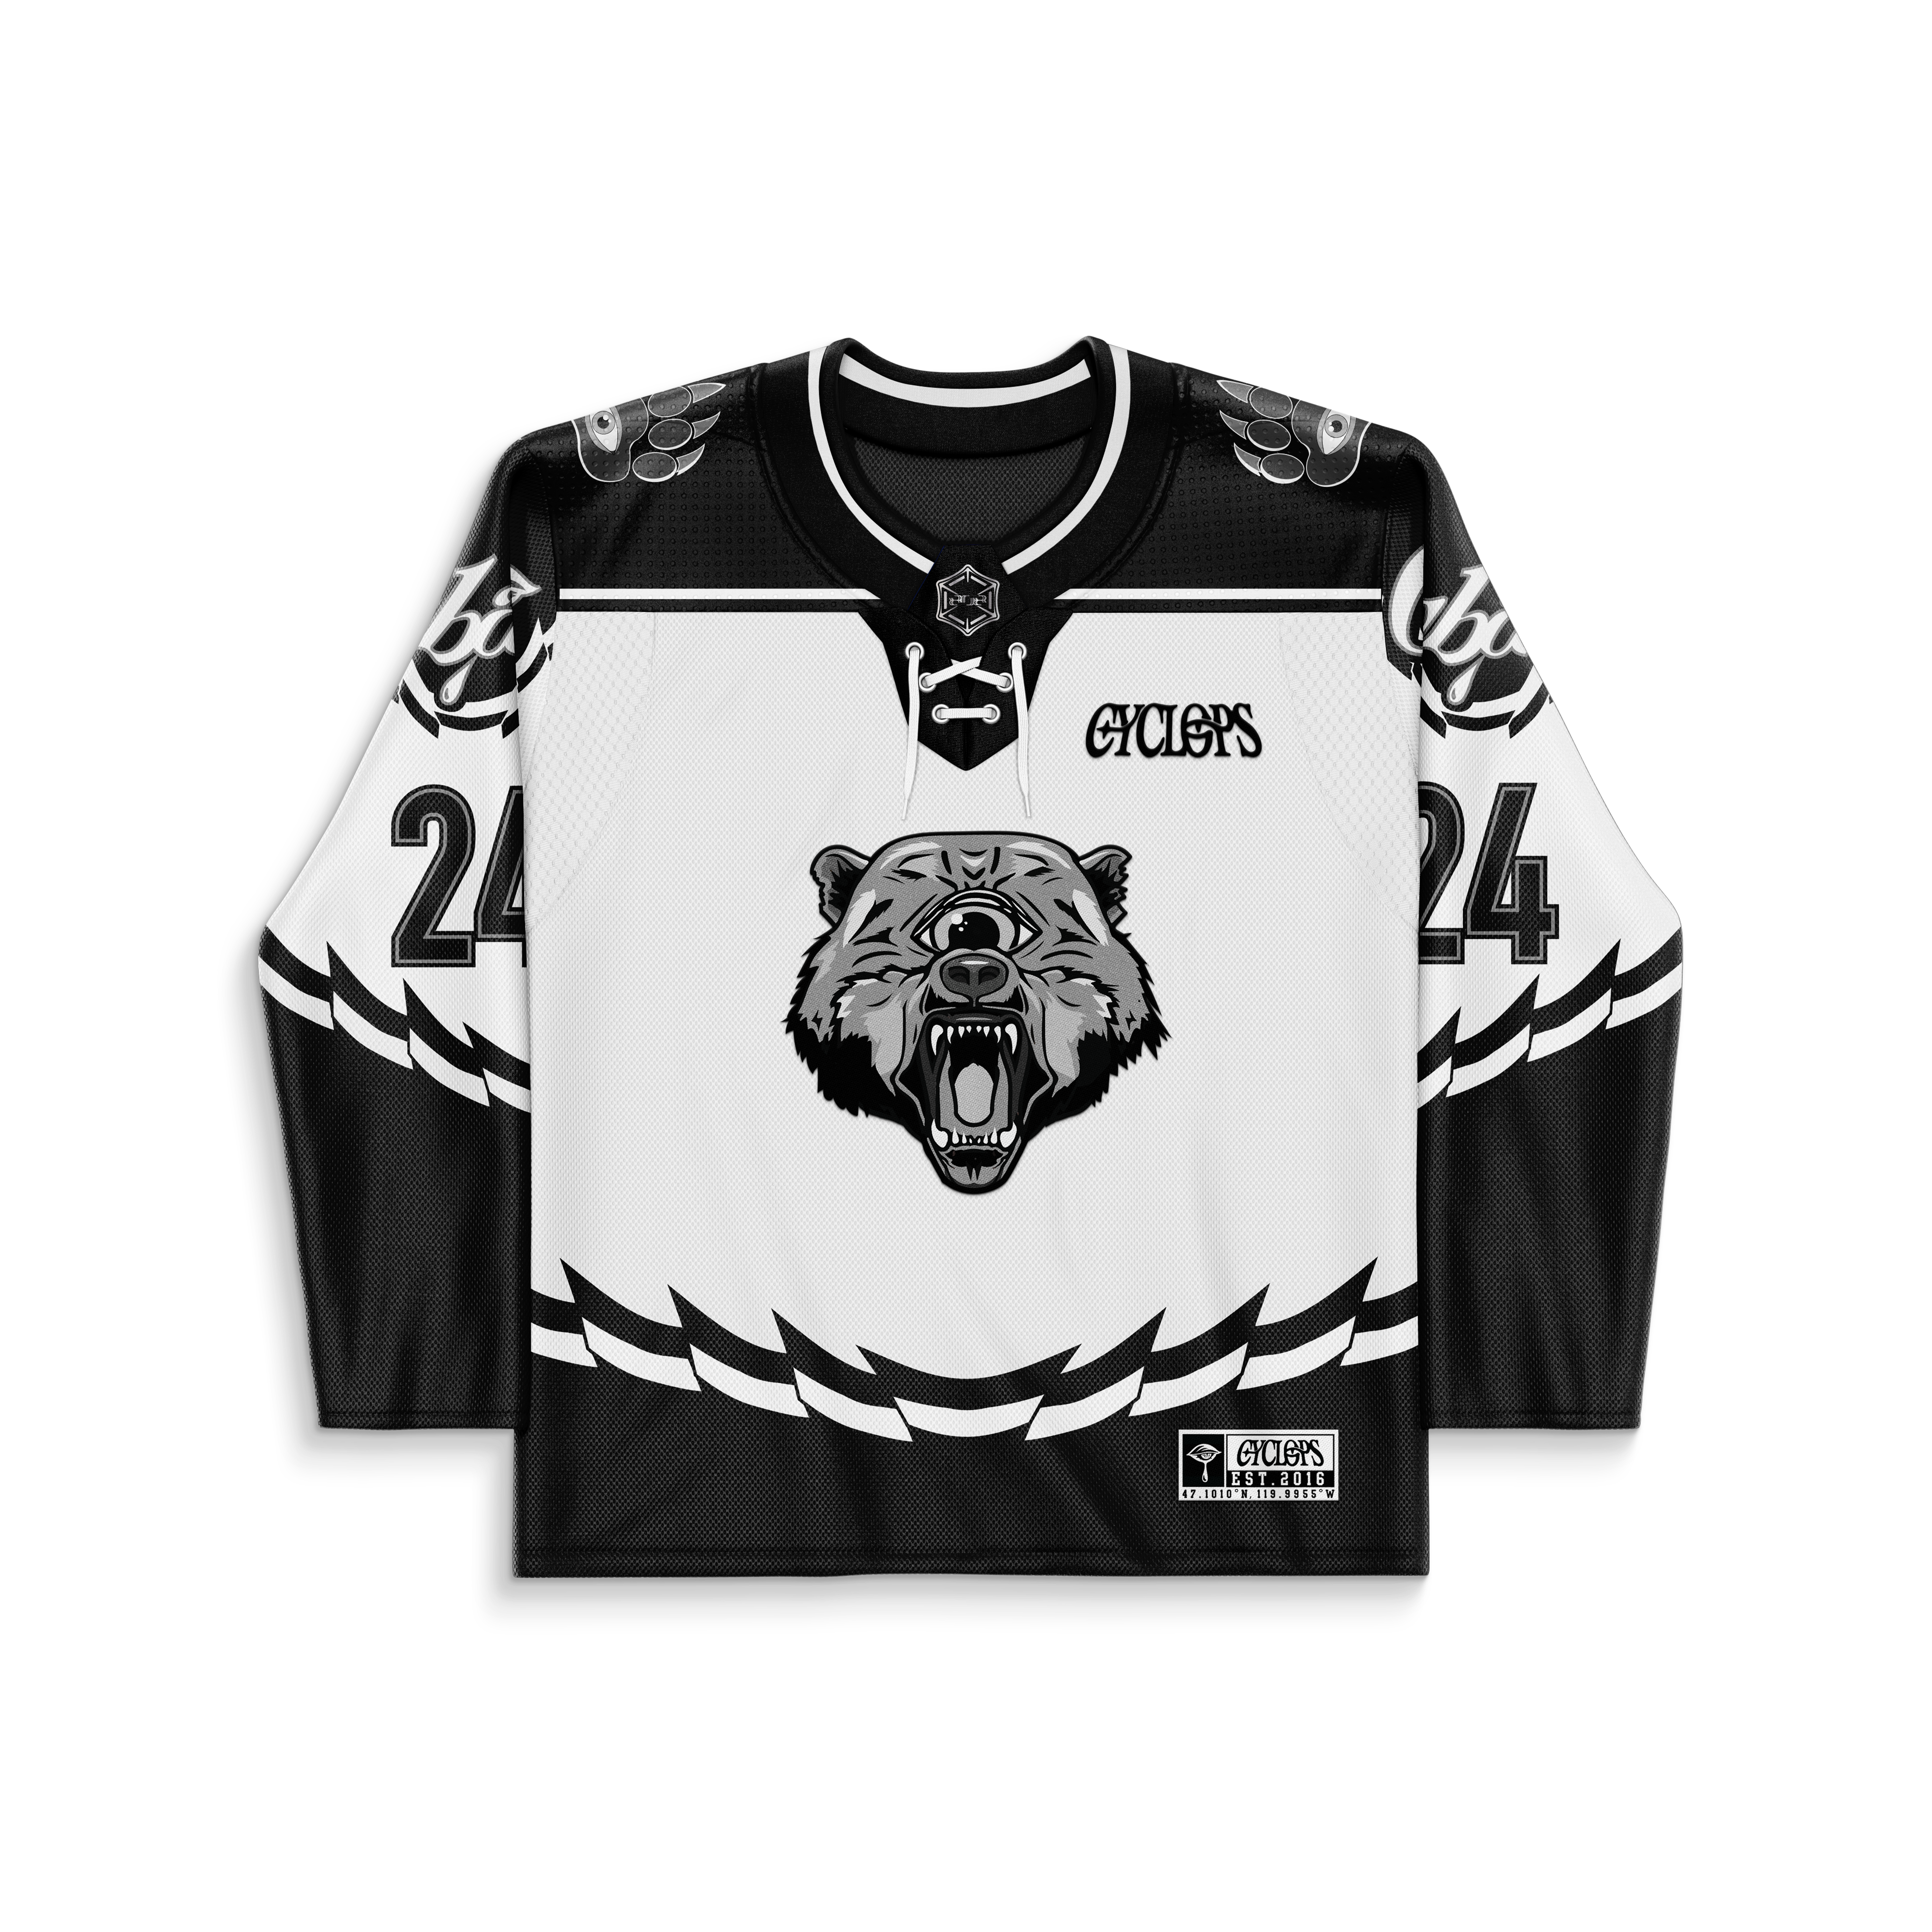 CYCLOPS CRYBABY HOCKEY JERESEY (PRE-ORDER)